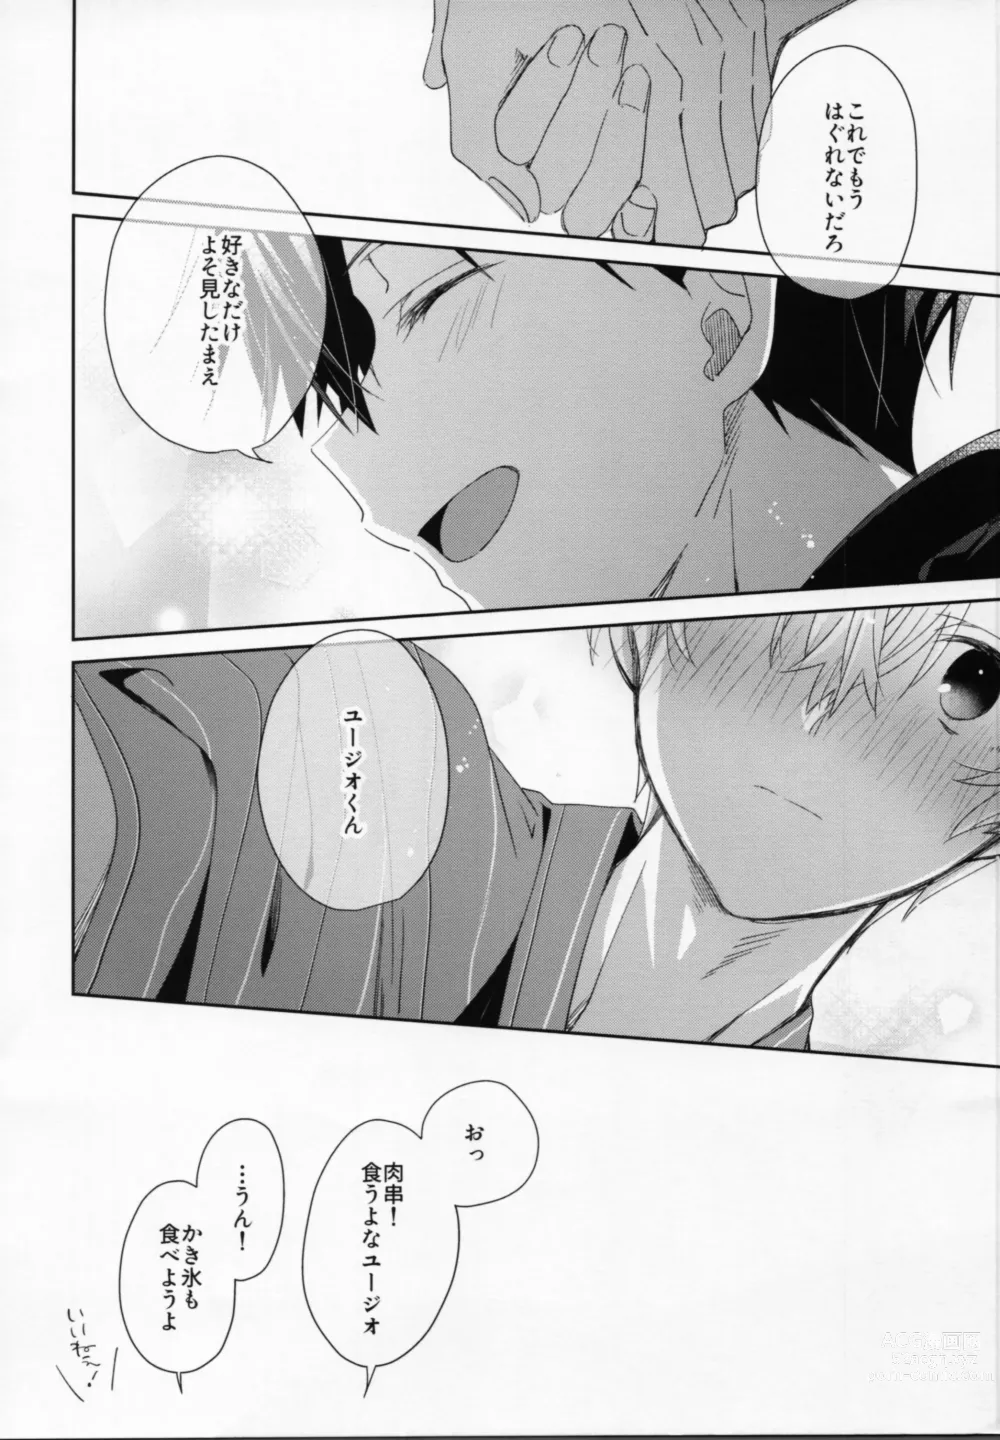 Page 4 of doujinshi Summer Tune